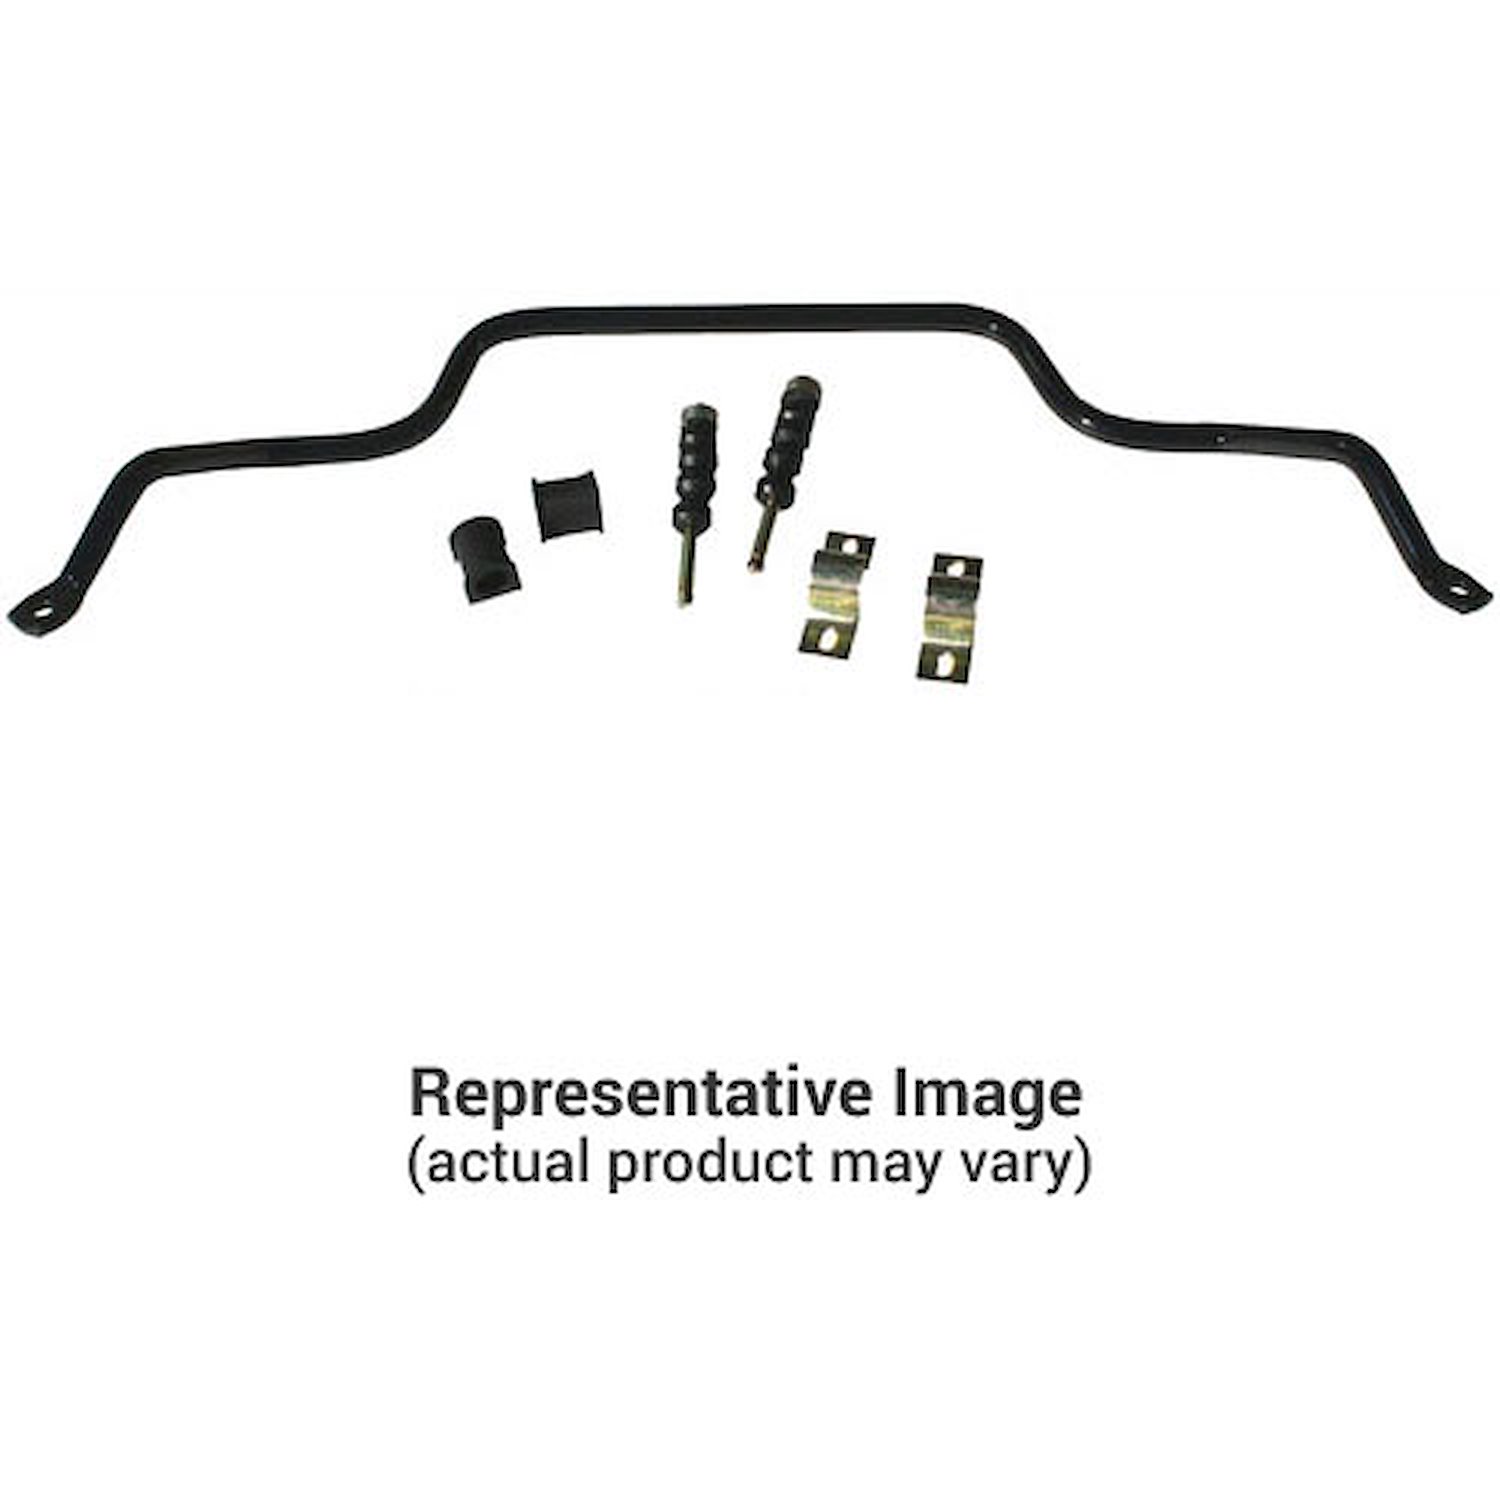 1 1/4" Front Sway Bar 1997-00 Ford F-150